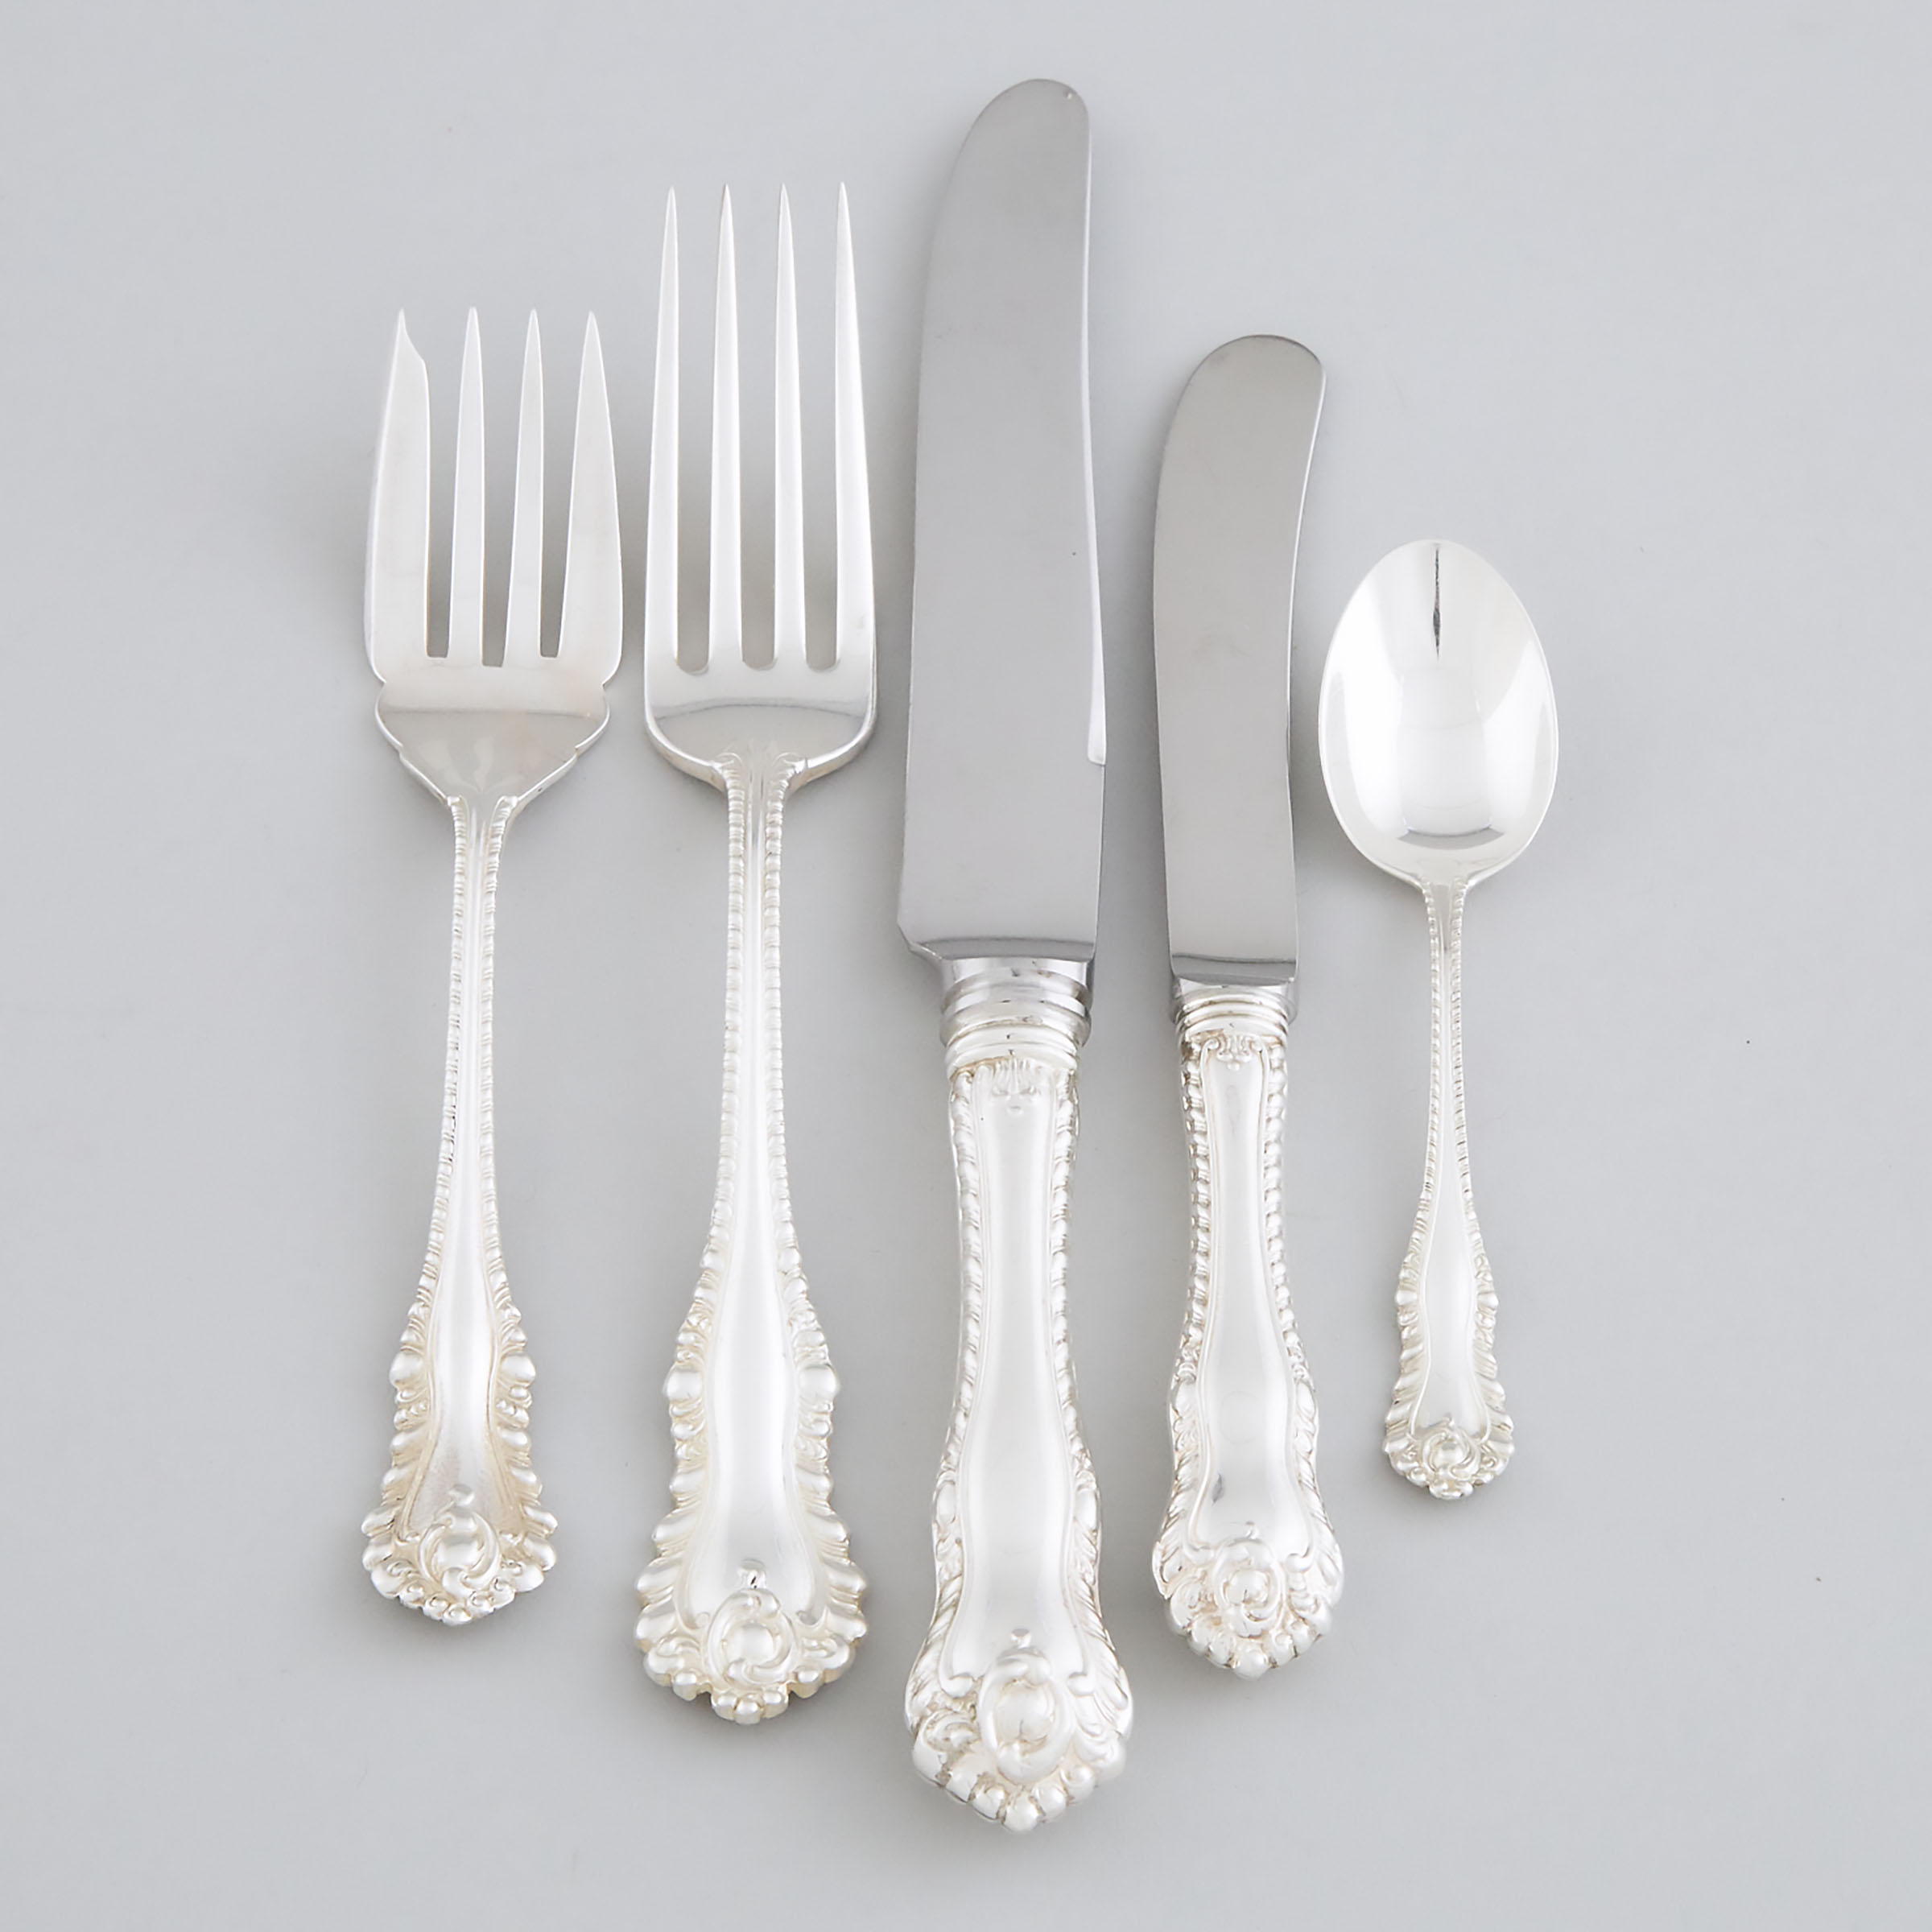 Canadian Silver ‘Gadroon’ Pattern Flatware Service, Henry Birks & Sons, Montreal, Que., 20th century